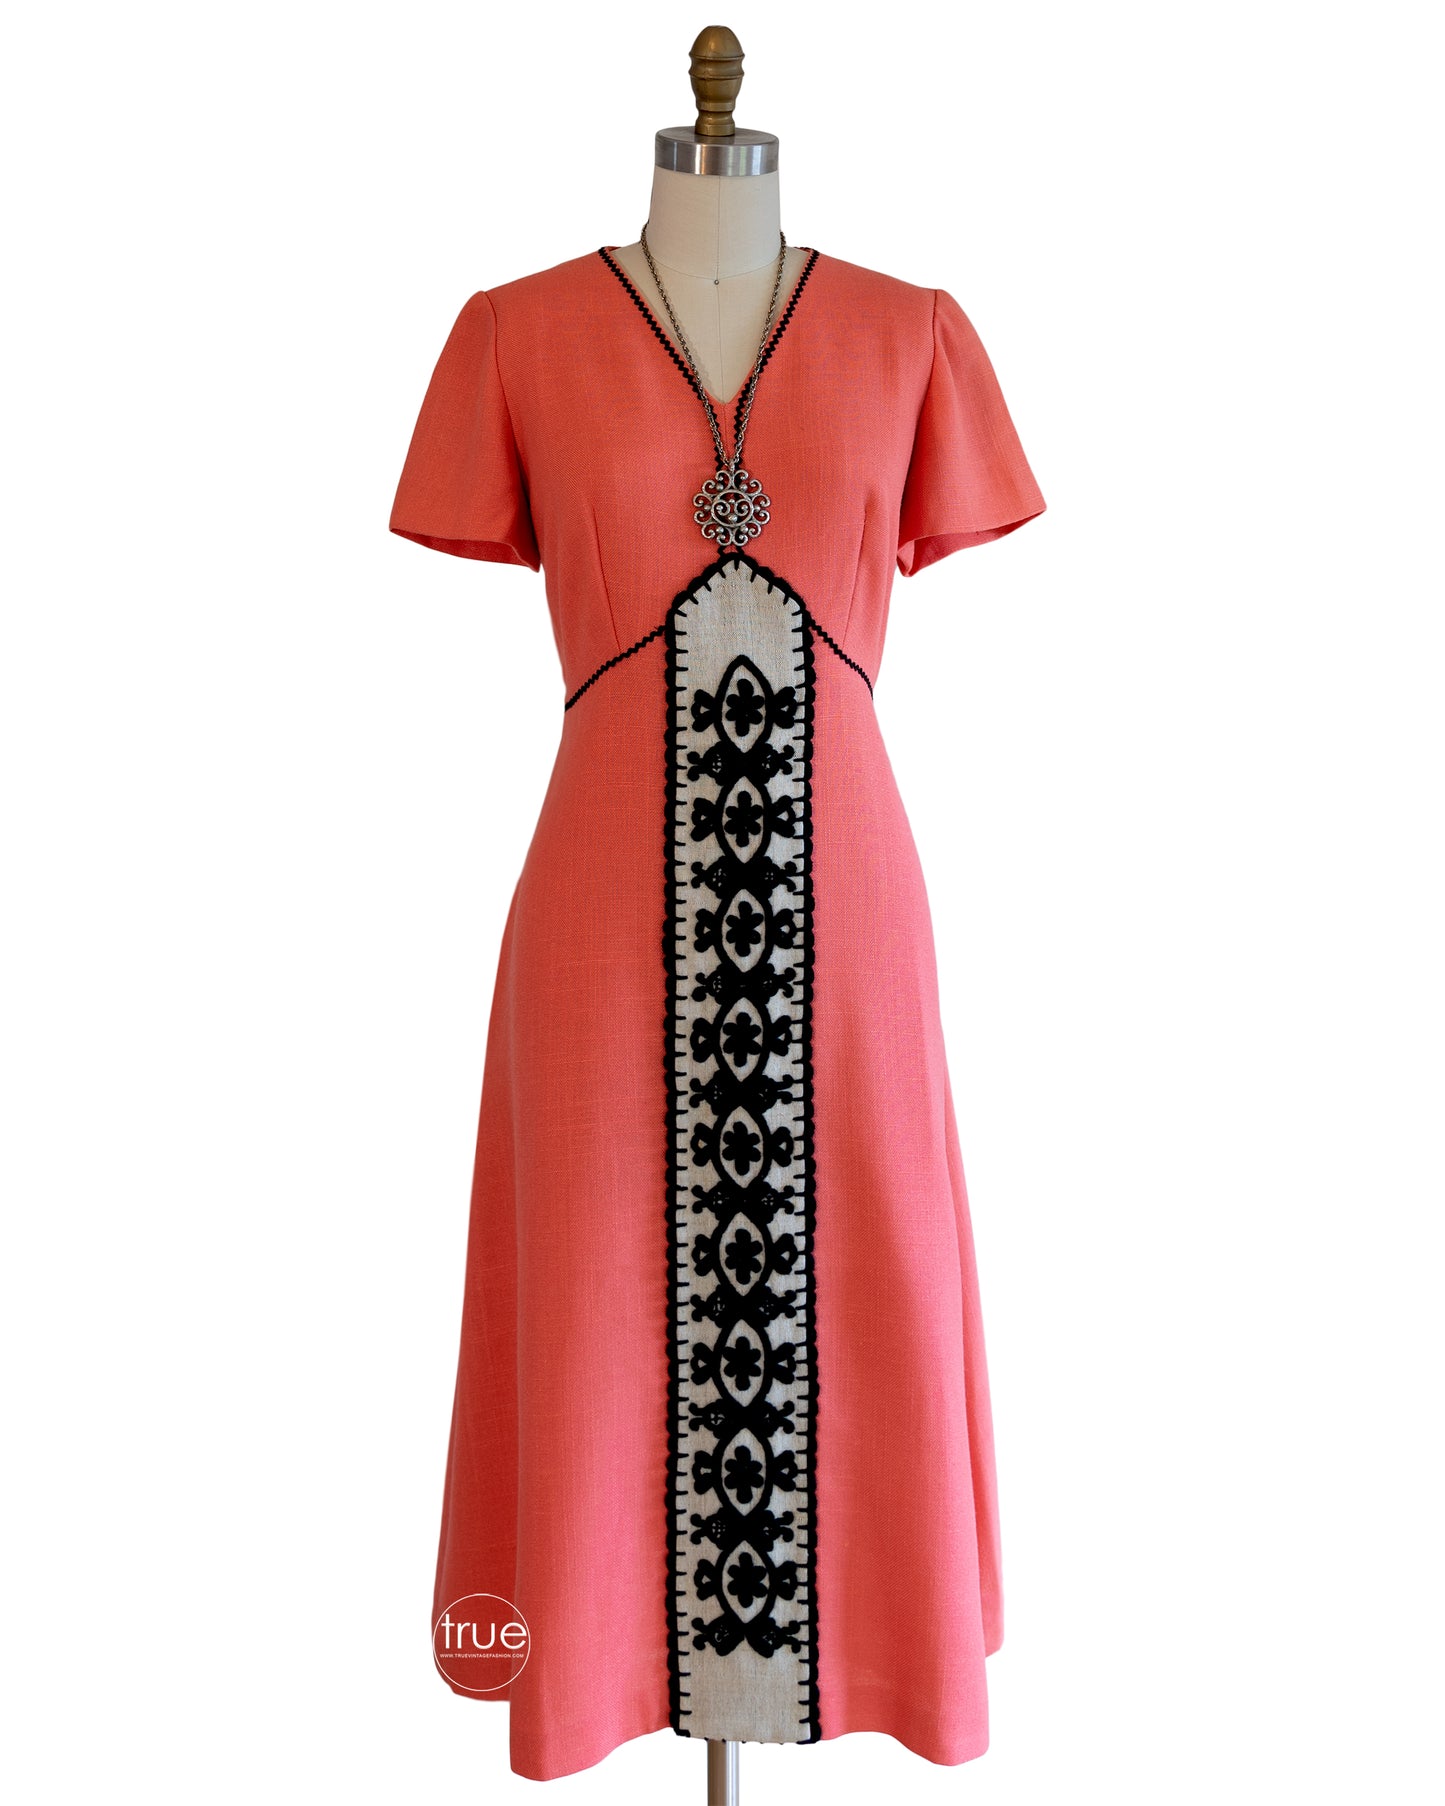 vintage 1960's dress ...Vera Maxwell Original coral dress with crewel embroidery